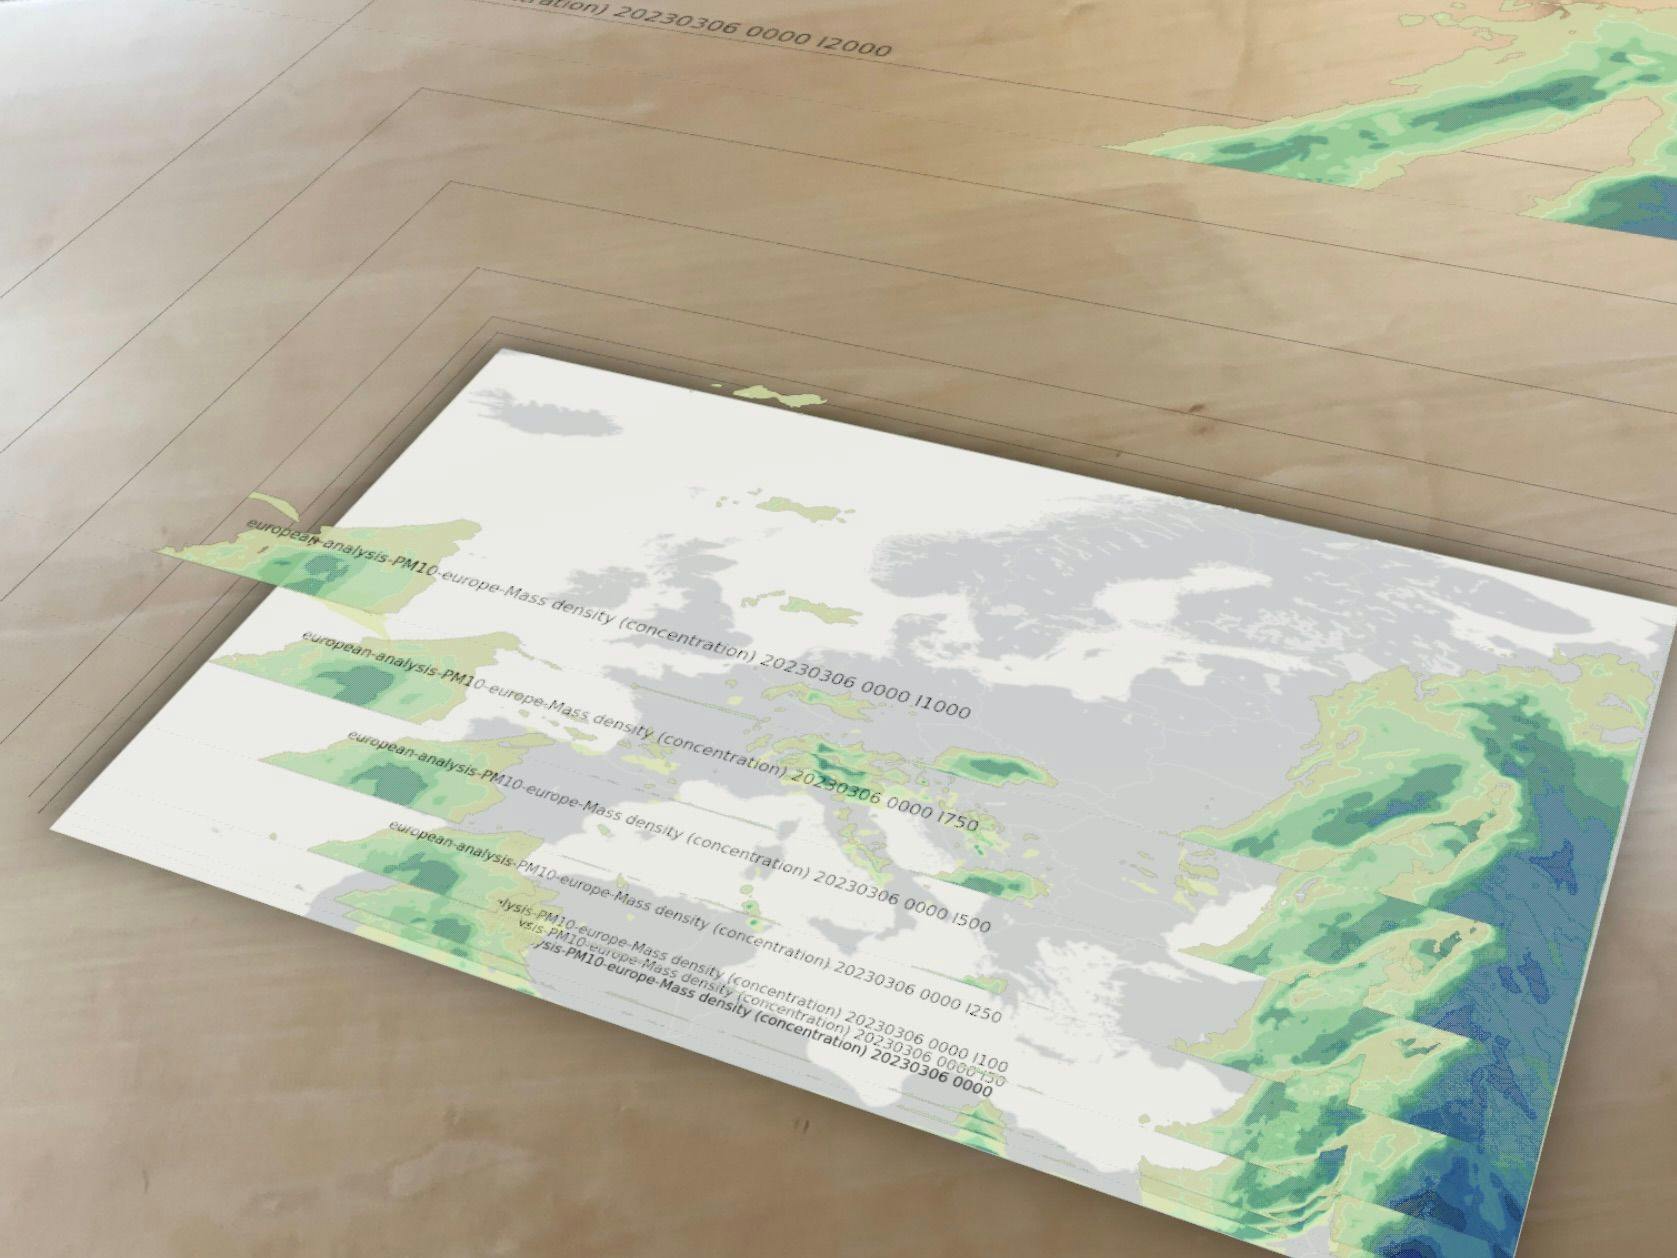 CALLISTO AR view: Air pollution vs. altitude levels – projected on a DW desk